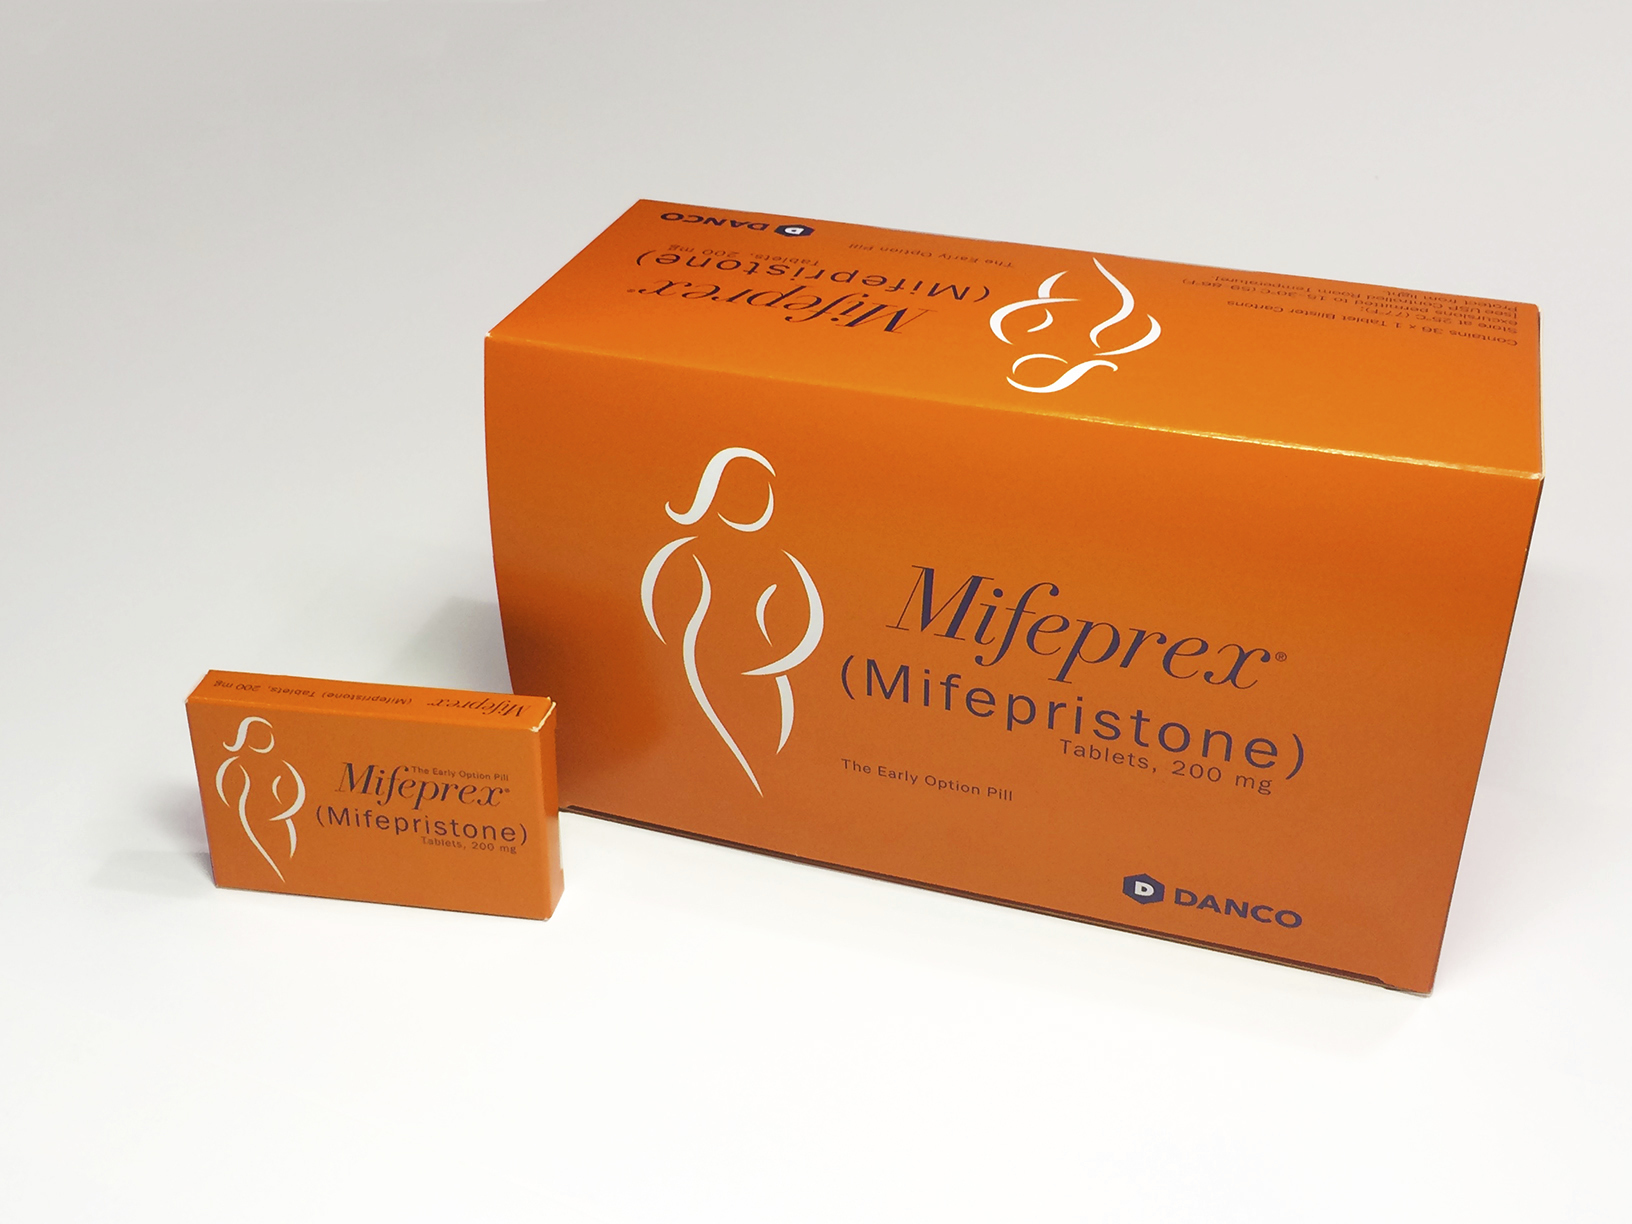 This March 2016 photo provided by Danco Laboratories shows boxes for the company's drug mifepristone, branded as "Mifeprex." (Danco Laboratories via AP)